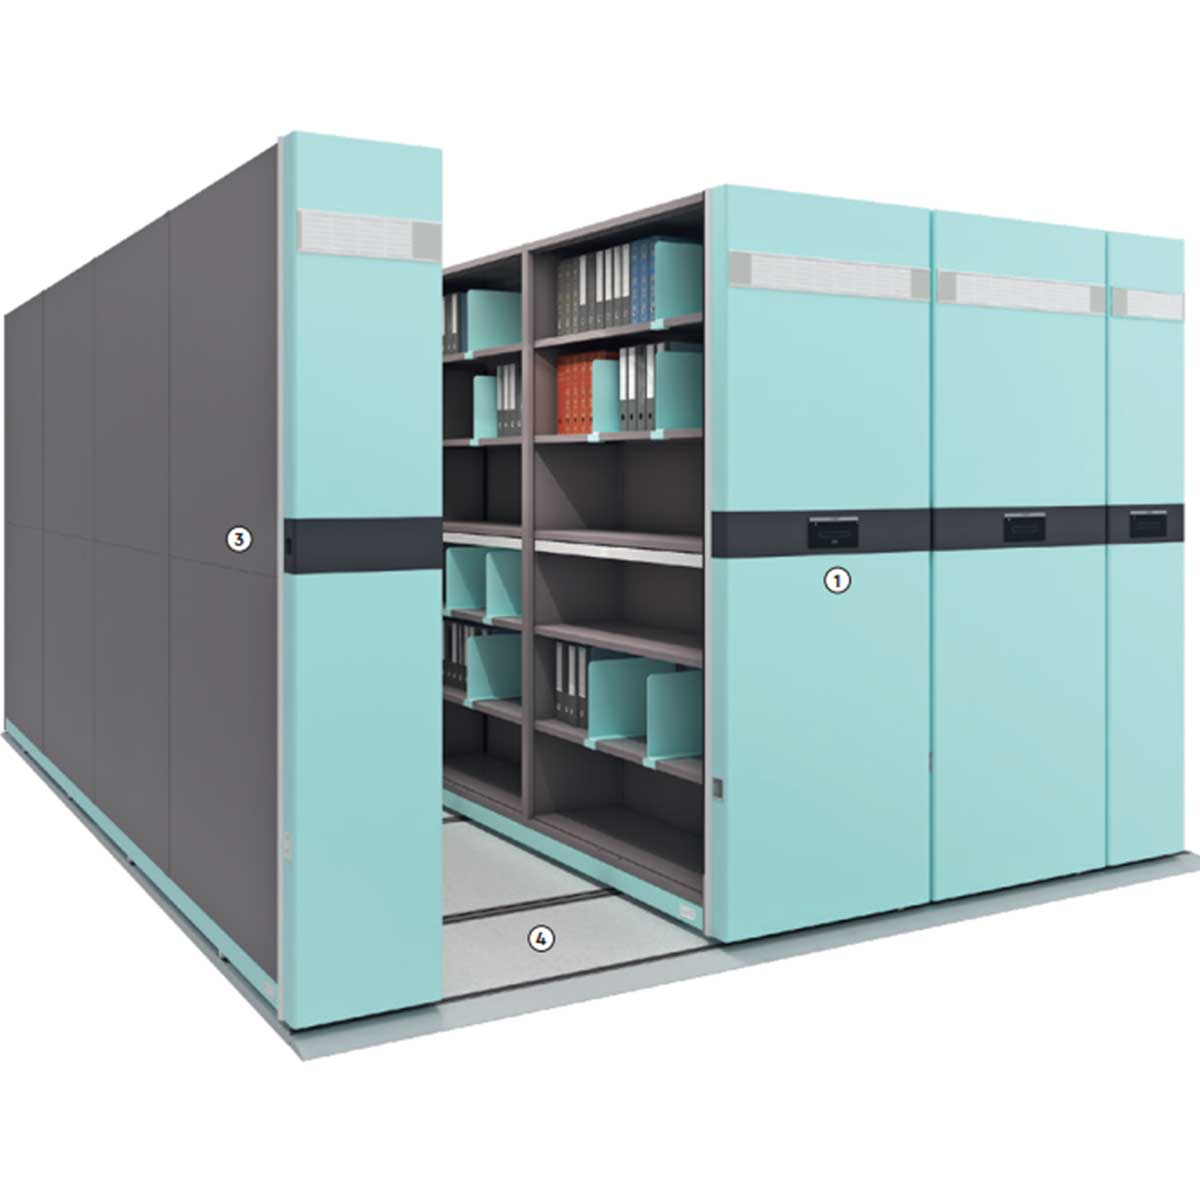 Mobile compactor storage Manufacturers, Suppliers in Janakpuri